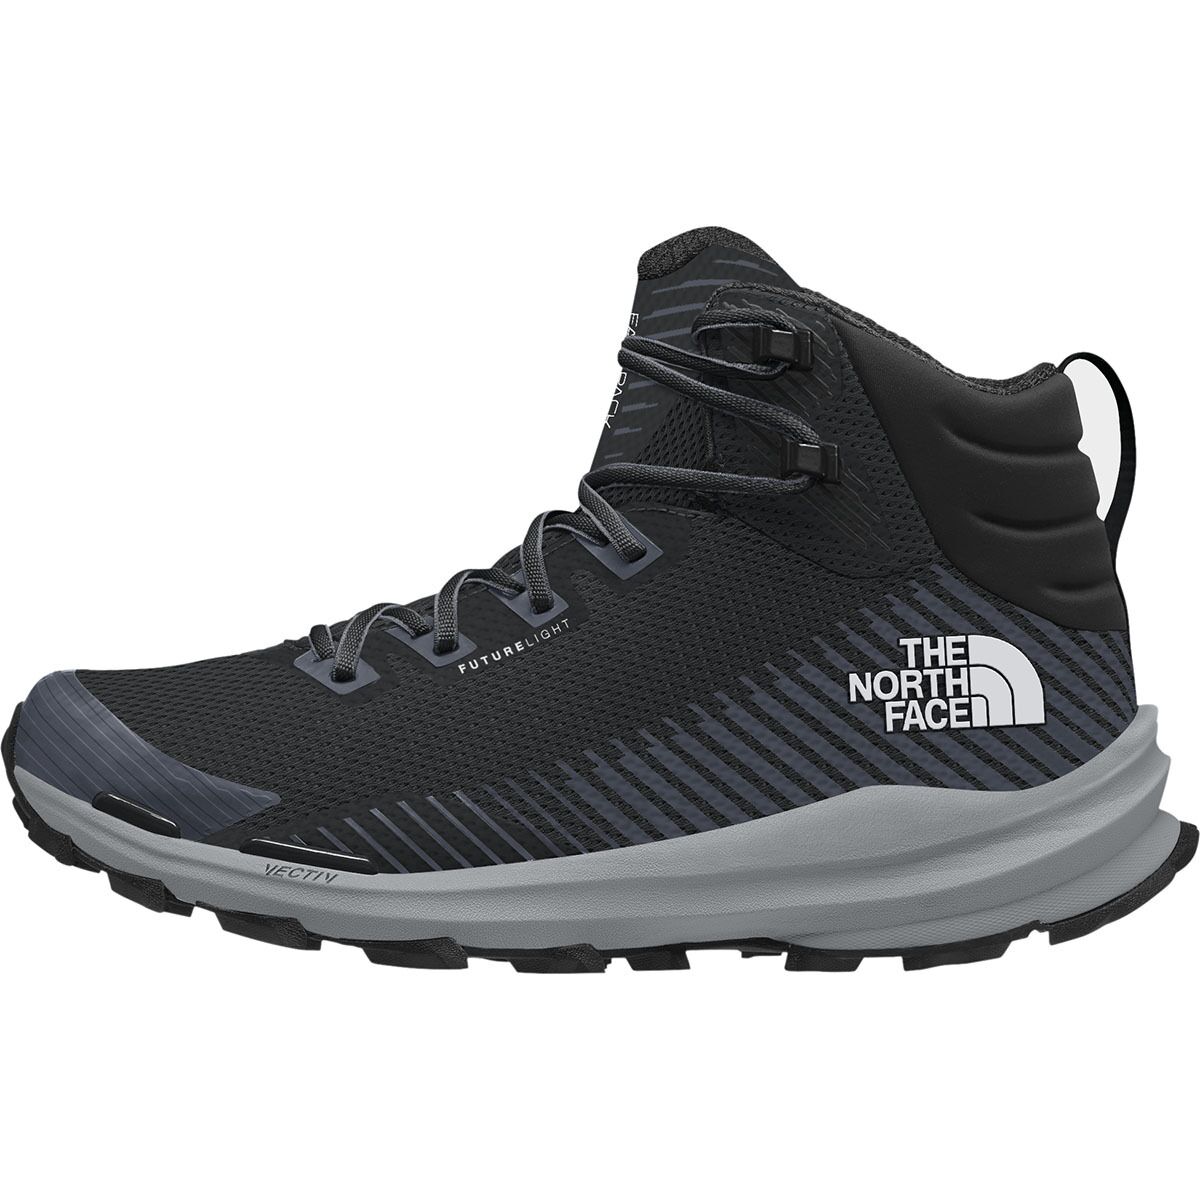 The North Face VECTIV Fastpack Mid FUTURELIGHT Hiking Boot - Men's